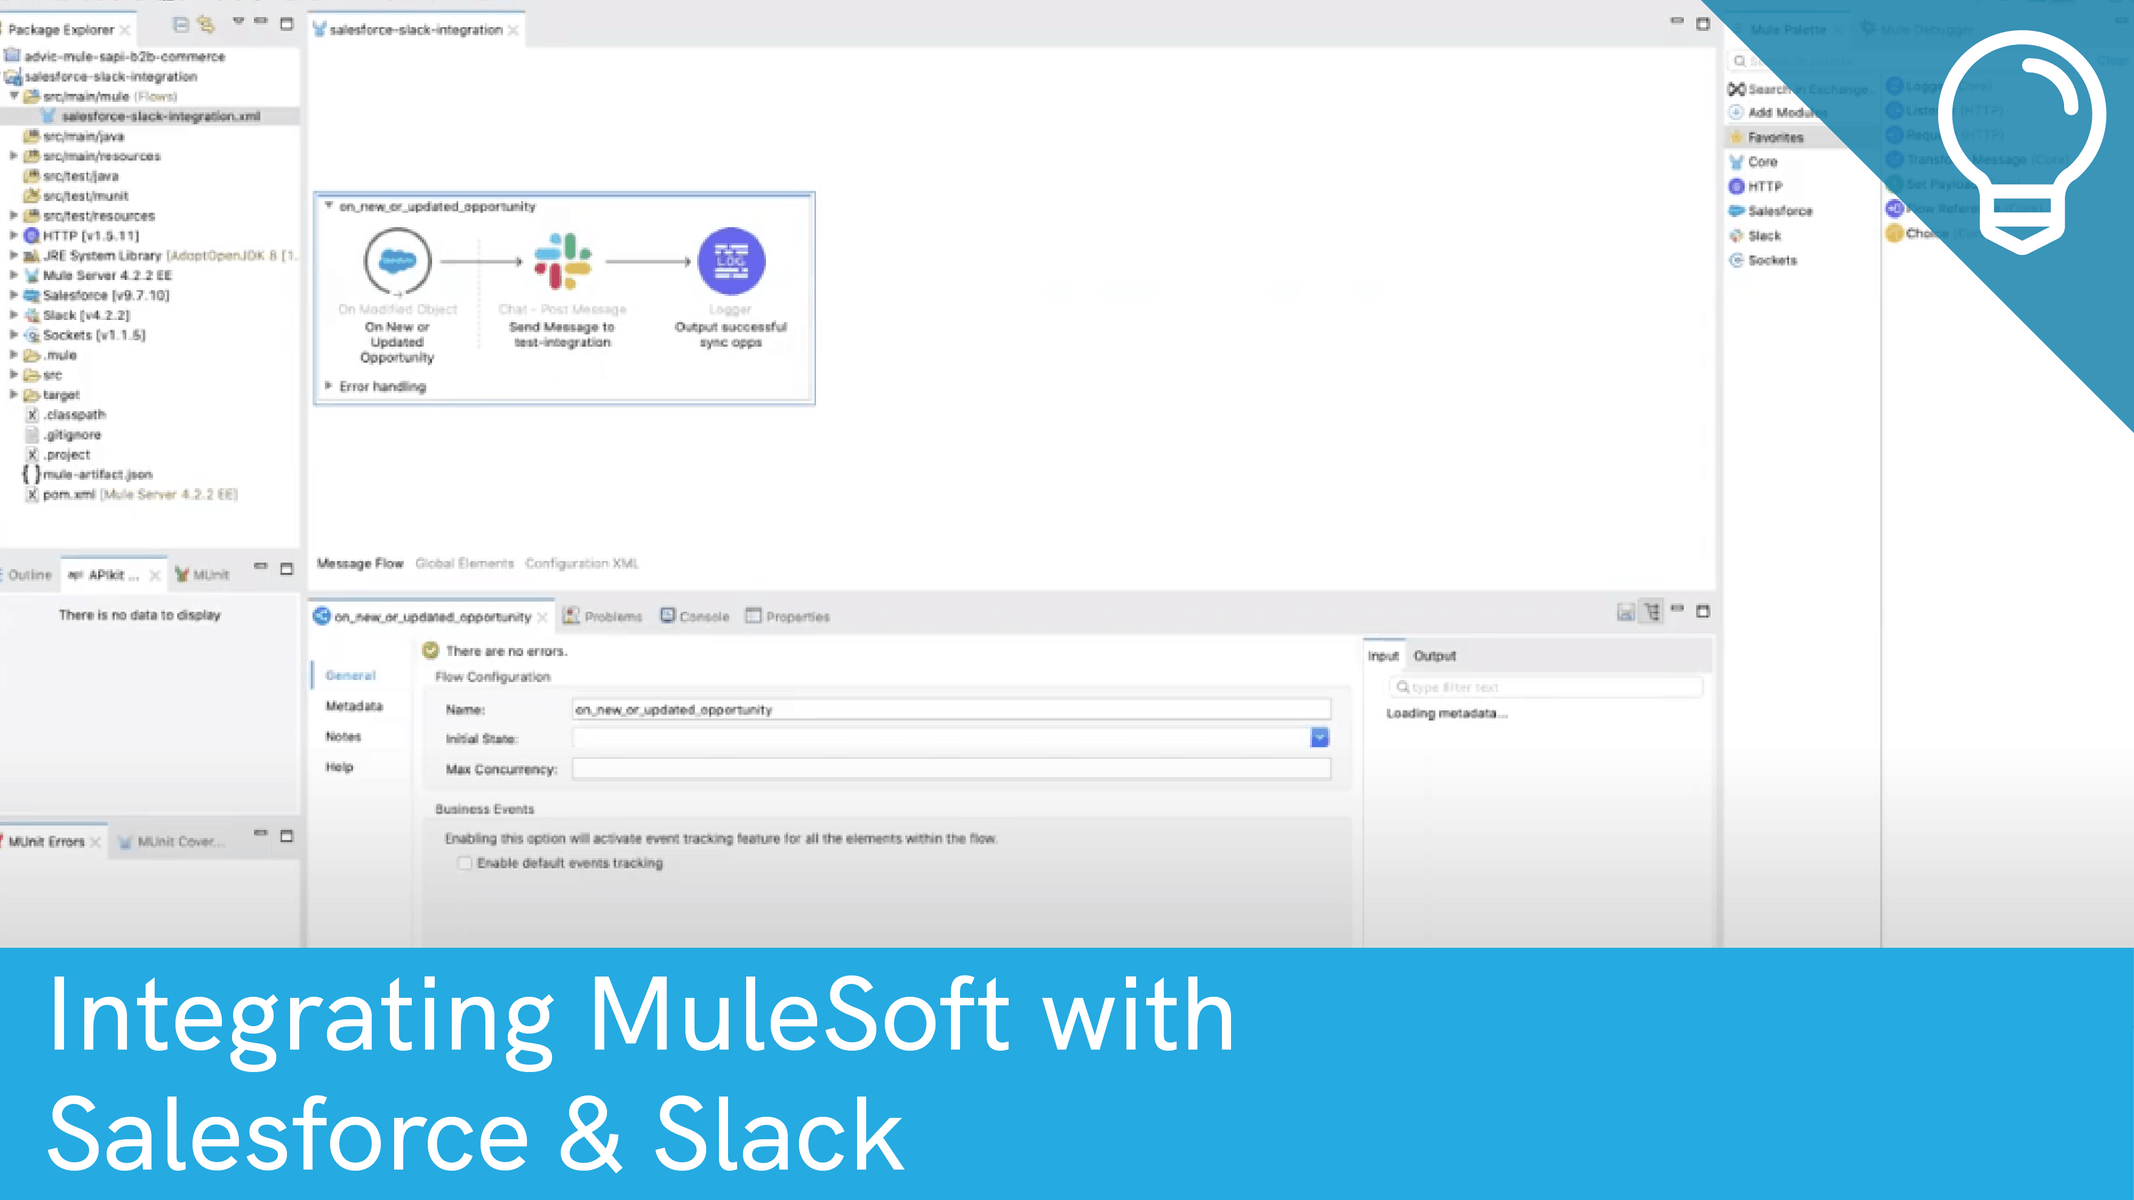 Integrating MuleSoft with Salesforce and Slack